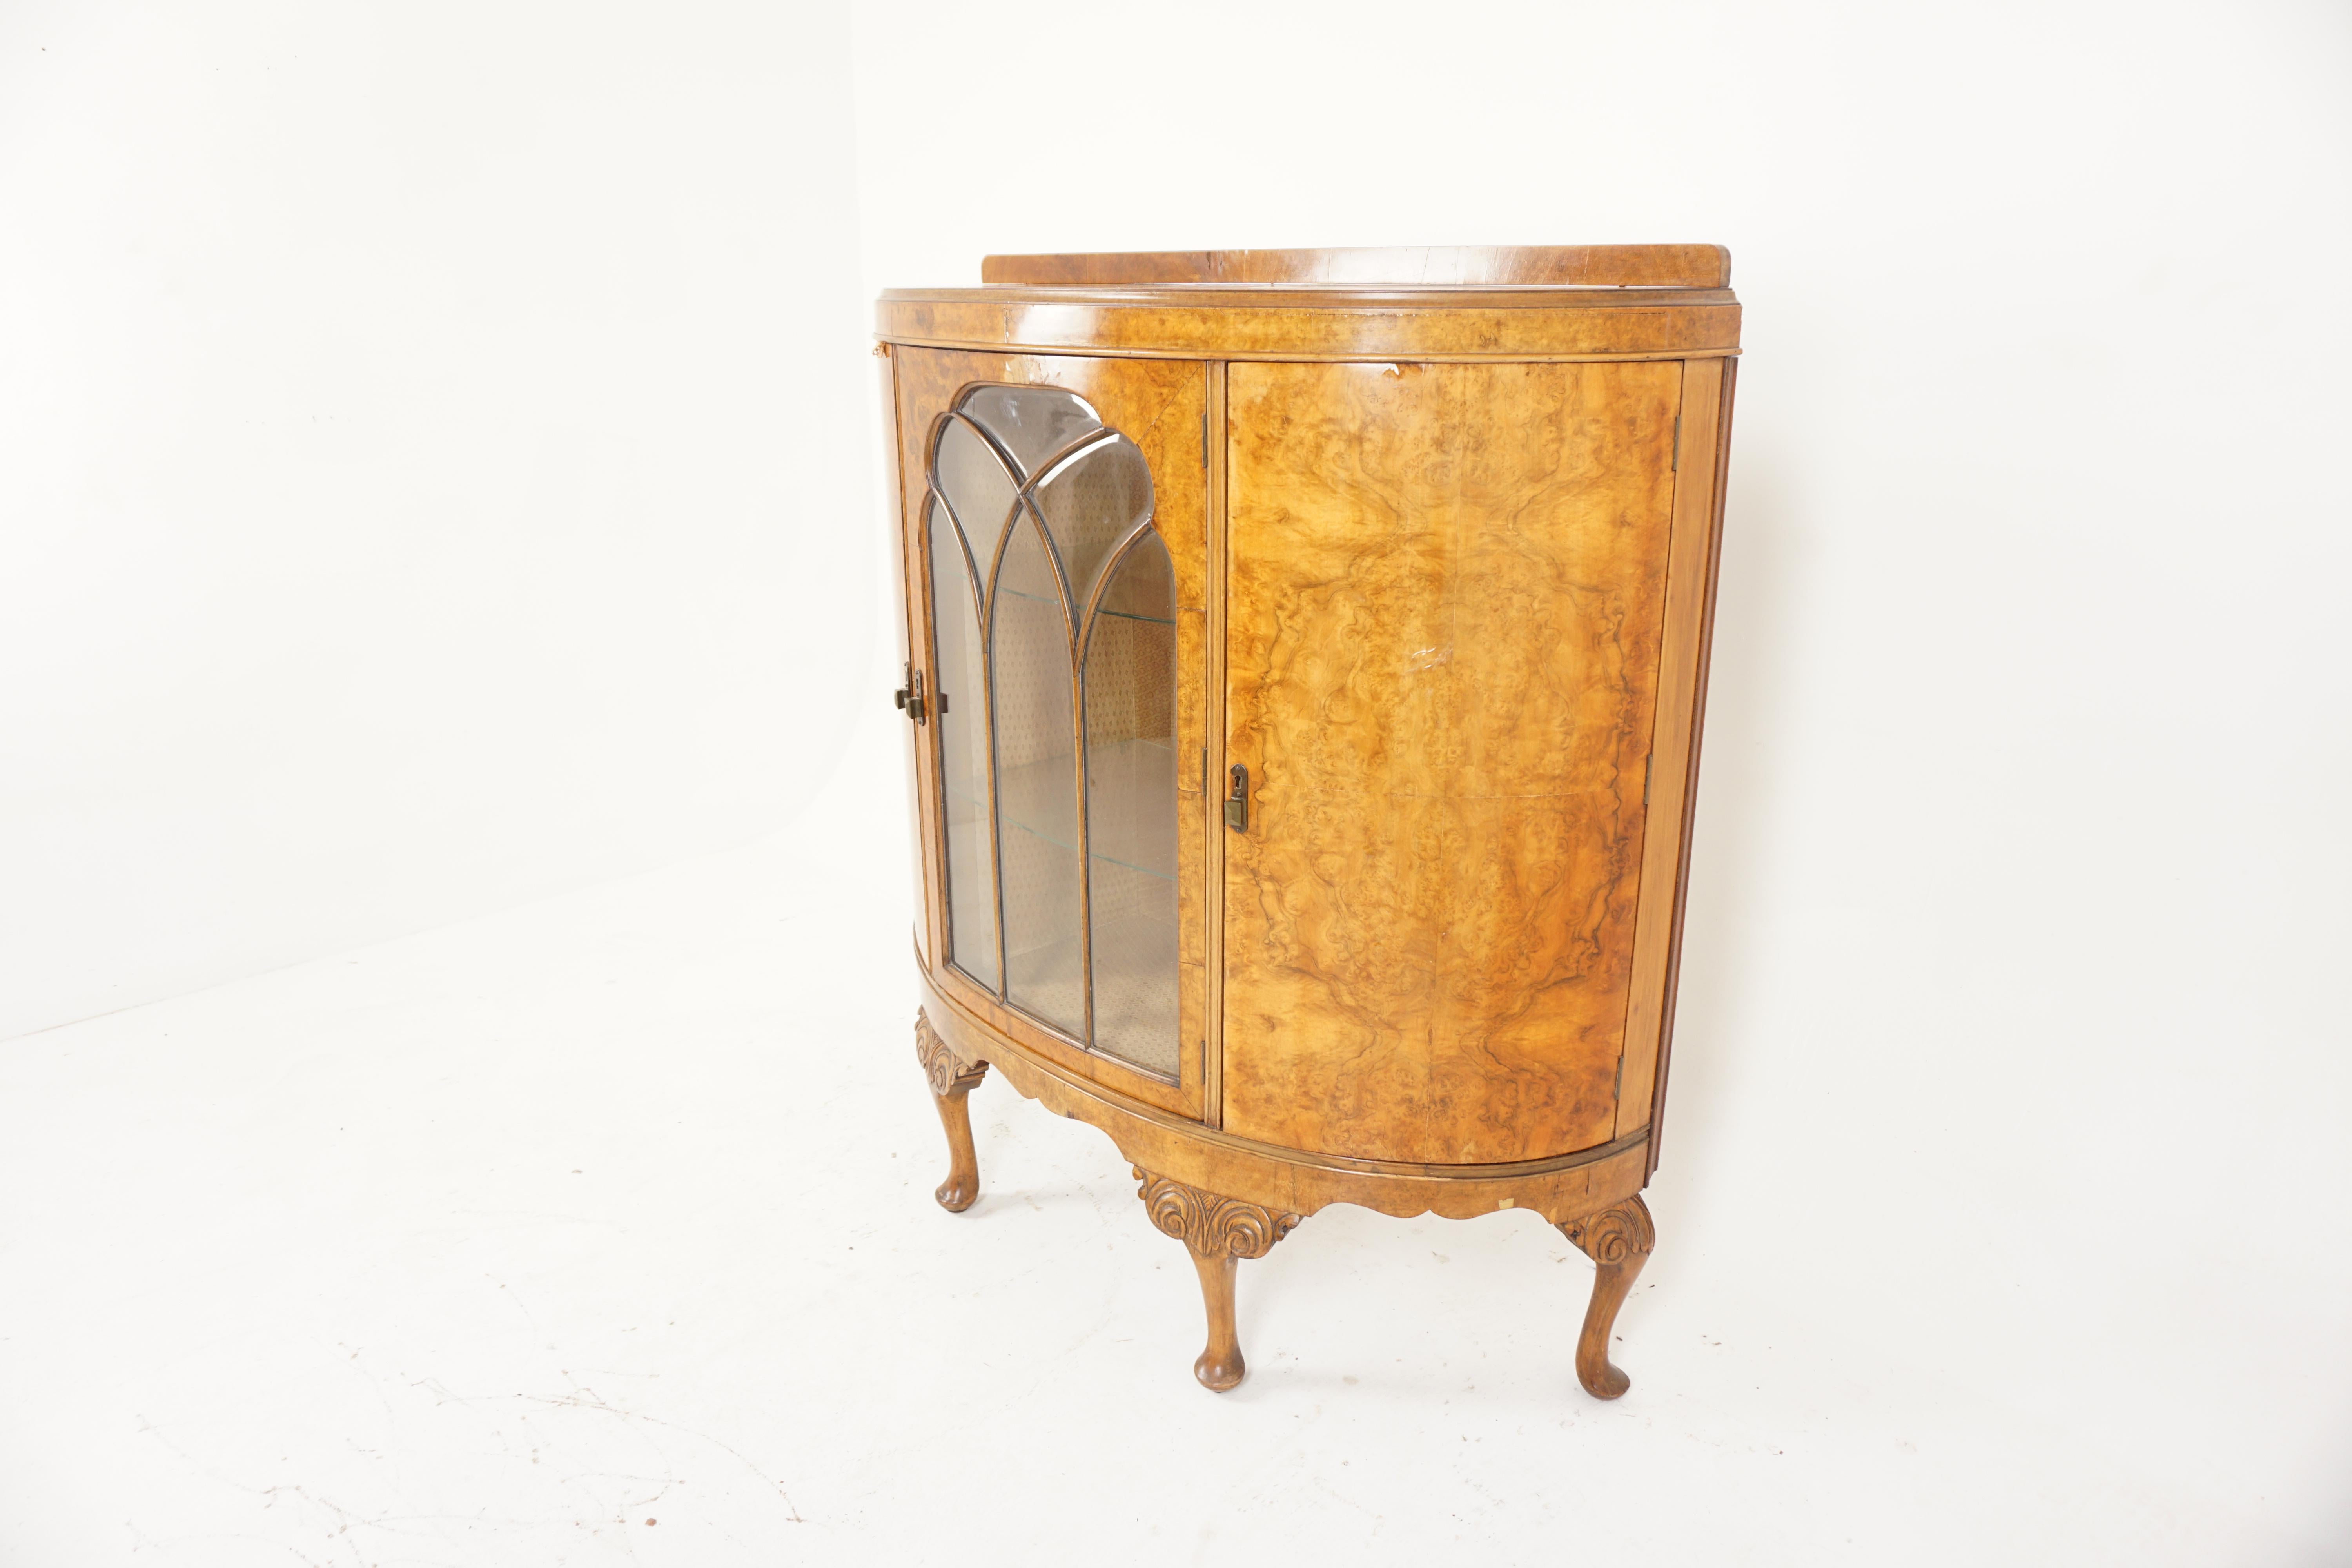 Quality Antique Burr Walnut Demi Lune China Cabinet, Display Cabinet, Scotland 1920, H765

Scotland 1920
Solid walnut + veneers
Original Finish
Small gallery with a wonderful burr walnut top
Moulding on the front
Pair of glass shelves